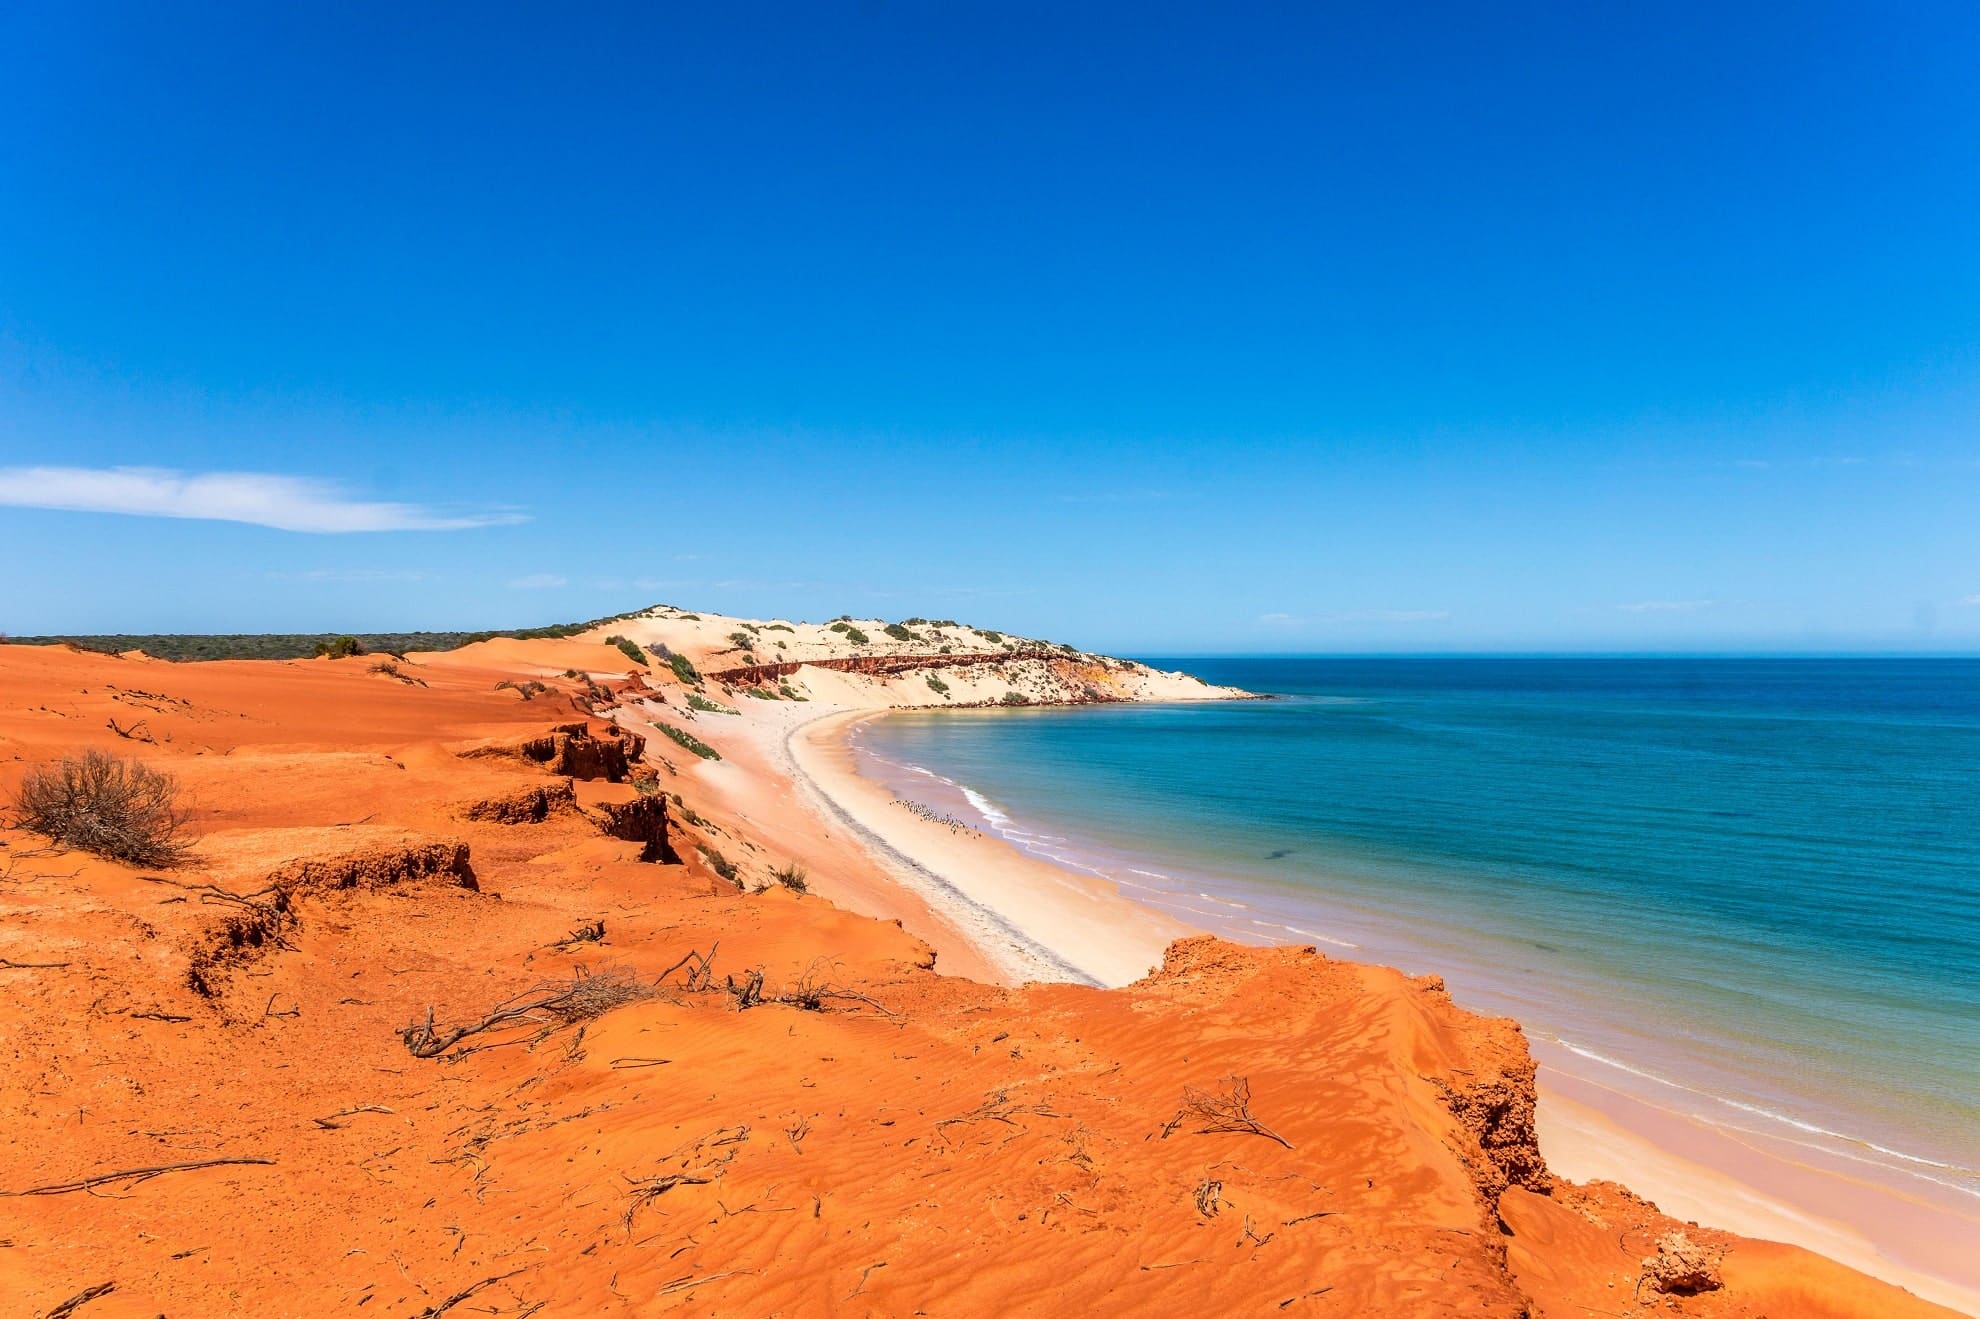 the red cliffs and white shores at the francois peron national park in geraldton, western australia